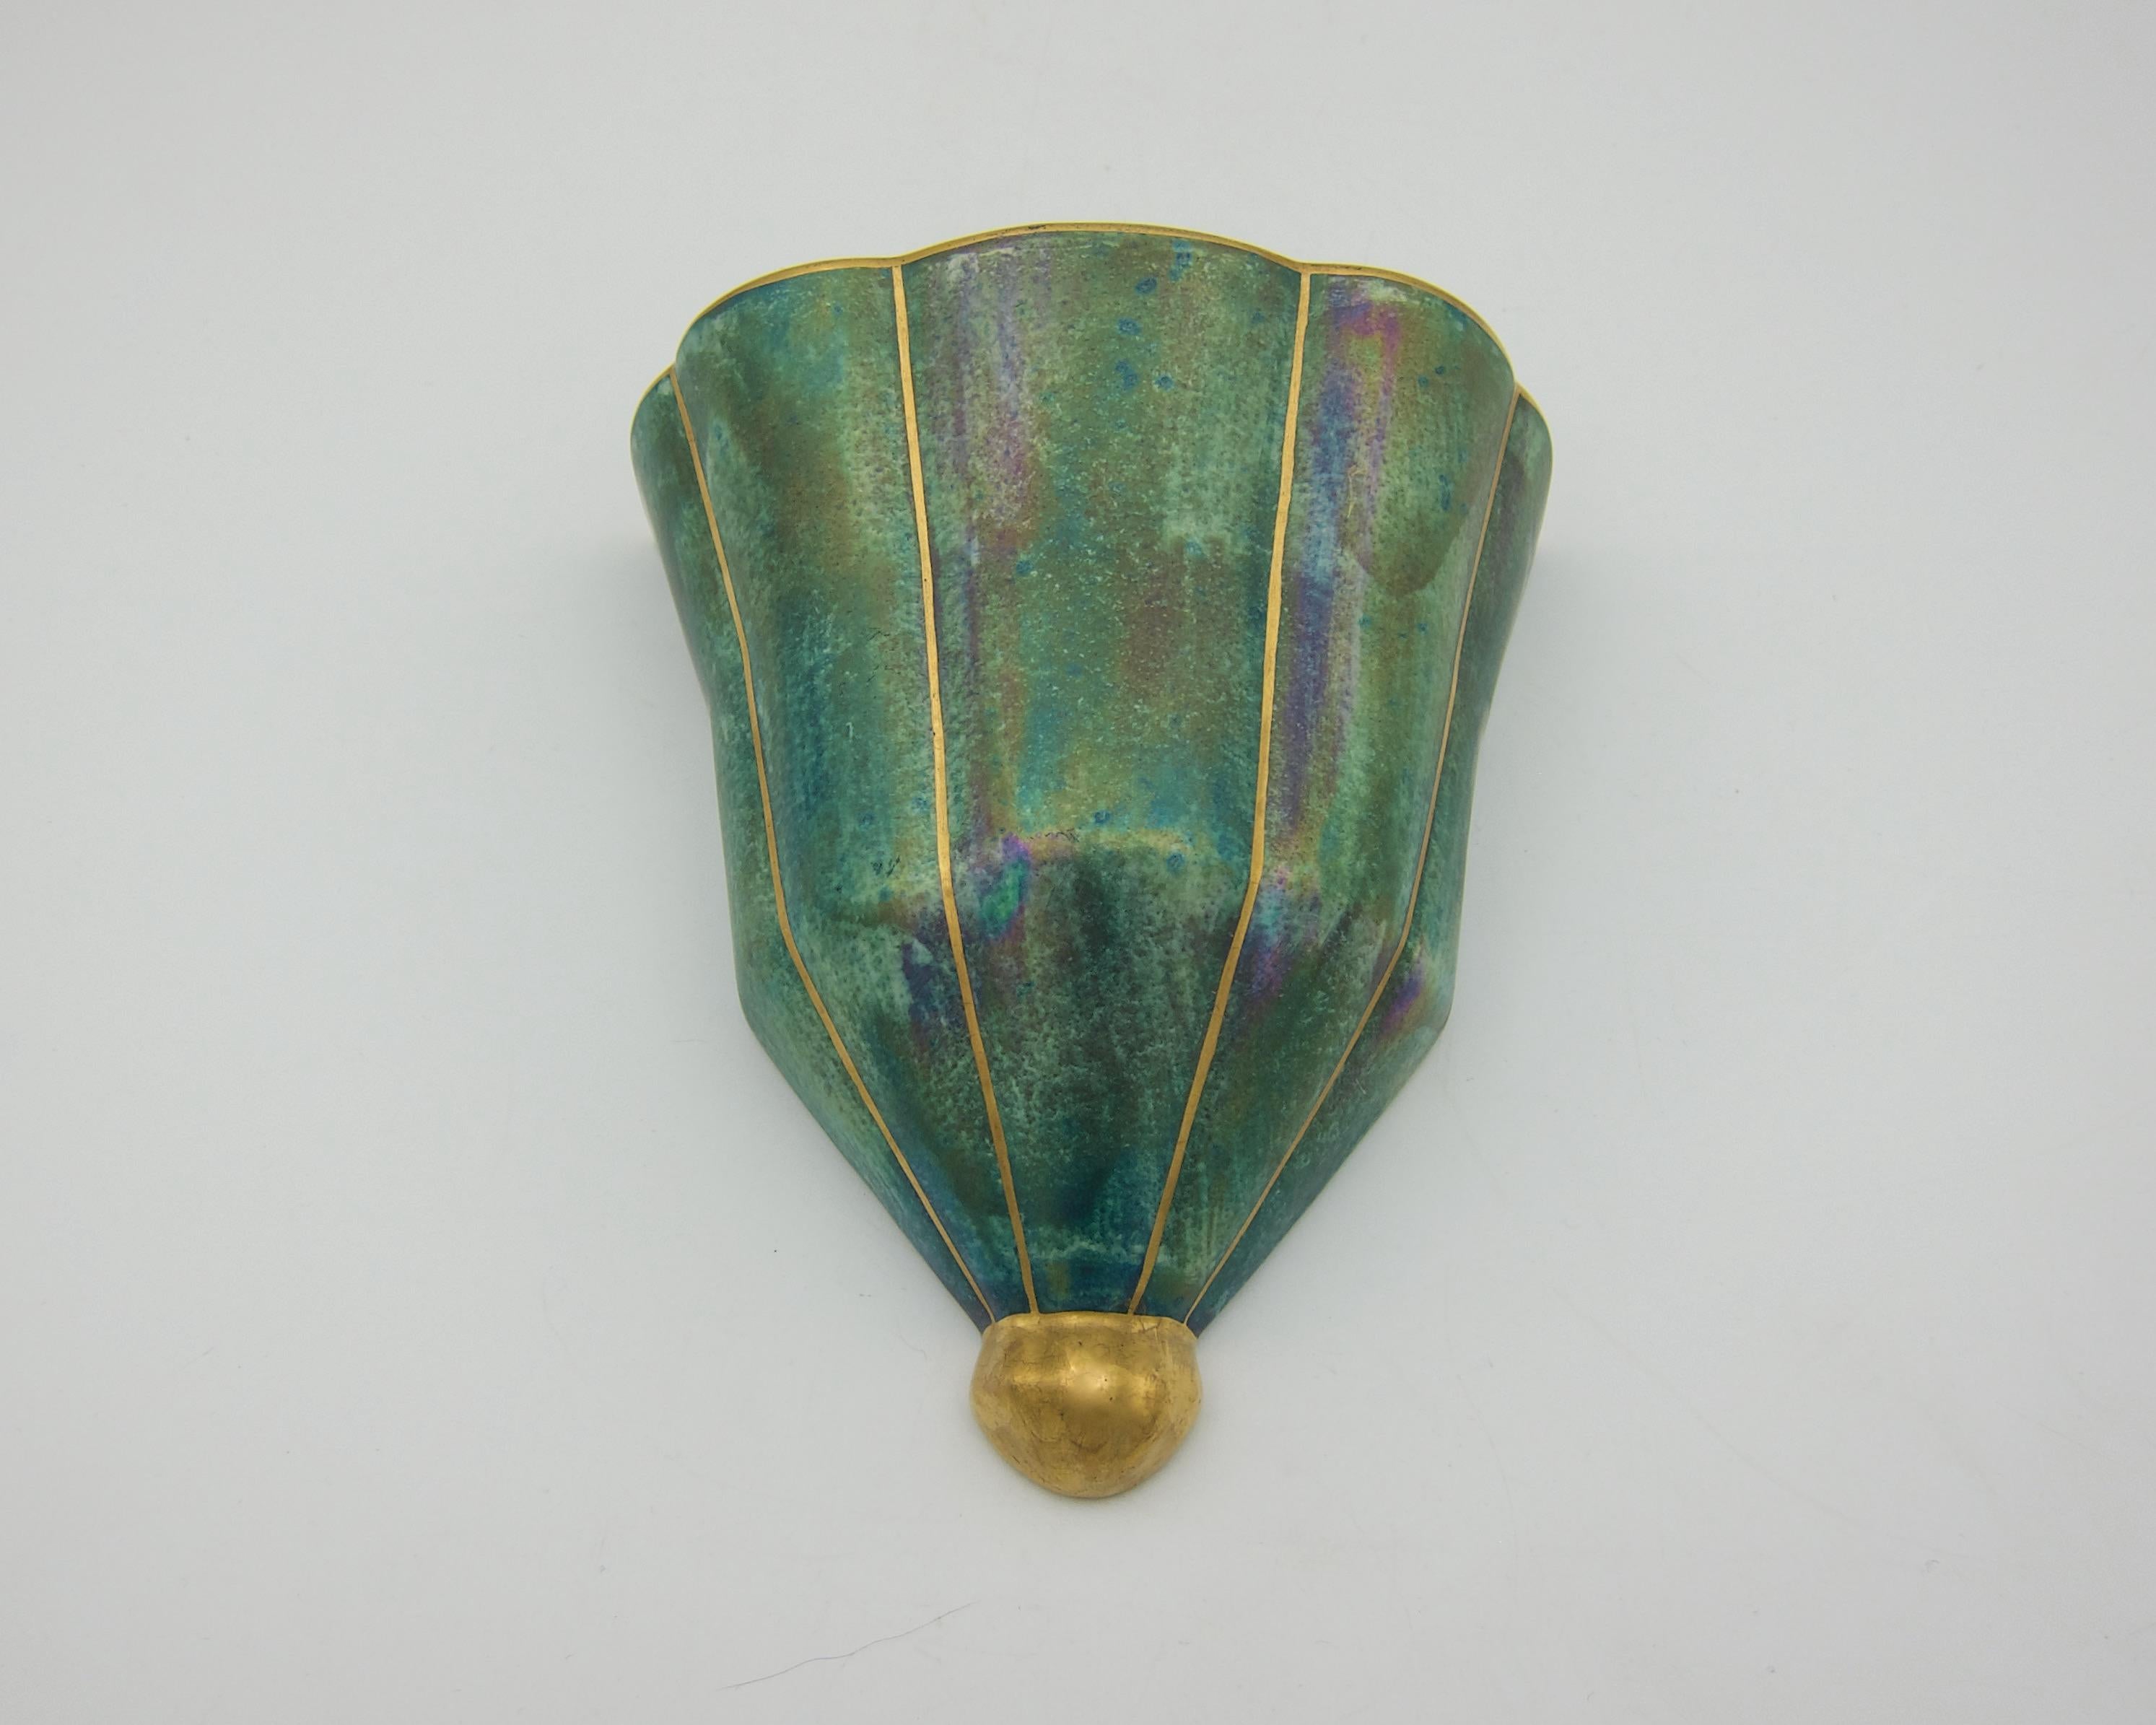 A Josef Ekberg (1877-1945) Art Deco wall pocket vase from the Gustavsberg Porcelain Factory of Sweden, produced during the second quarter of the 20th century. The lobed vessel fans outward and is decorated with a striking iridescent luster glaze of